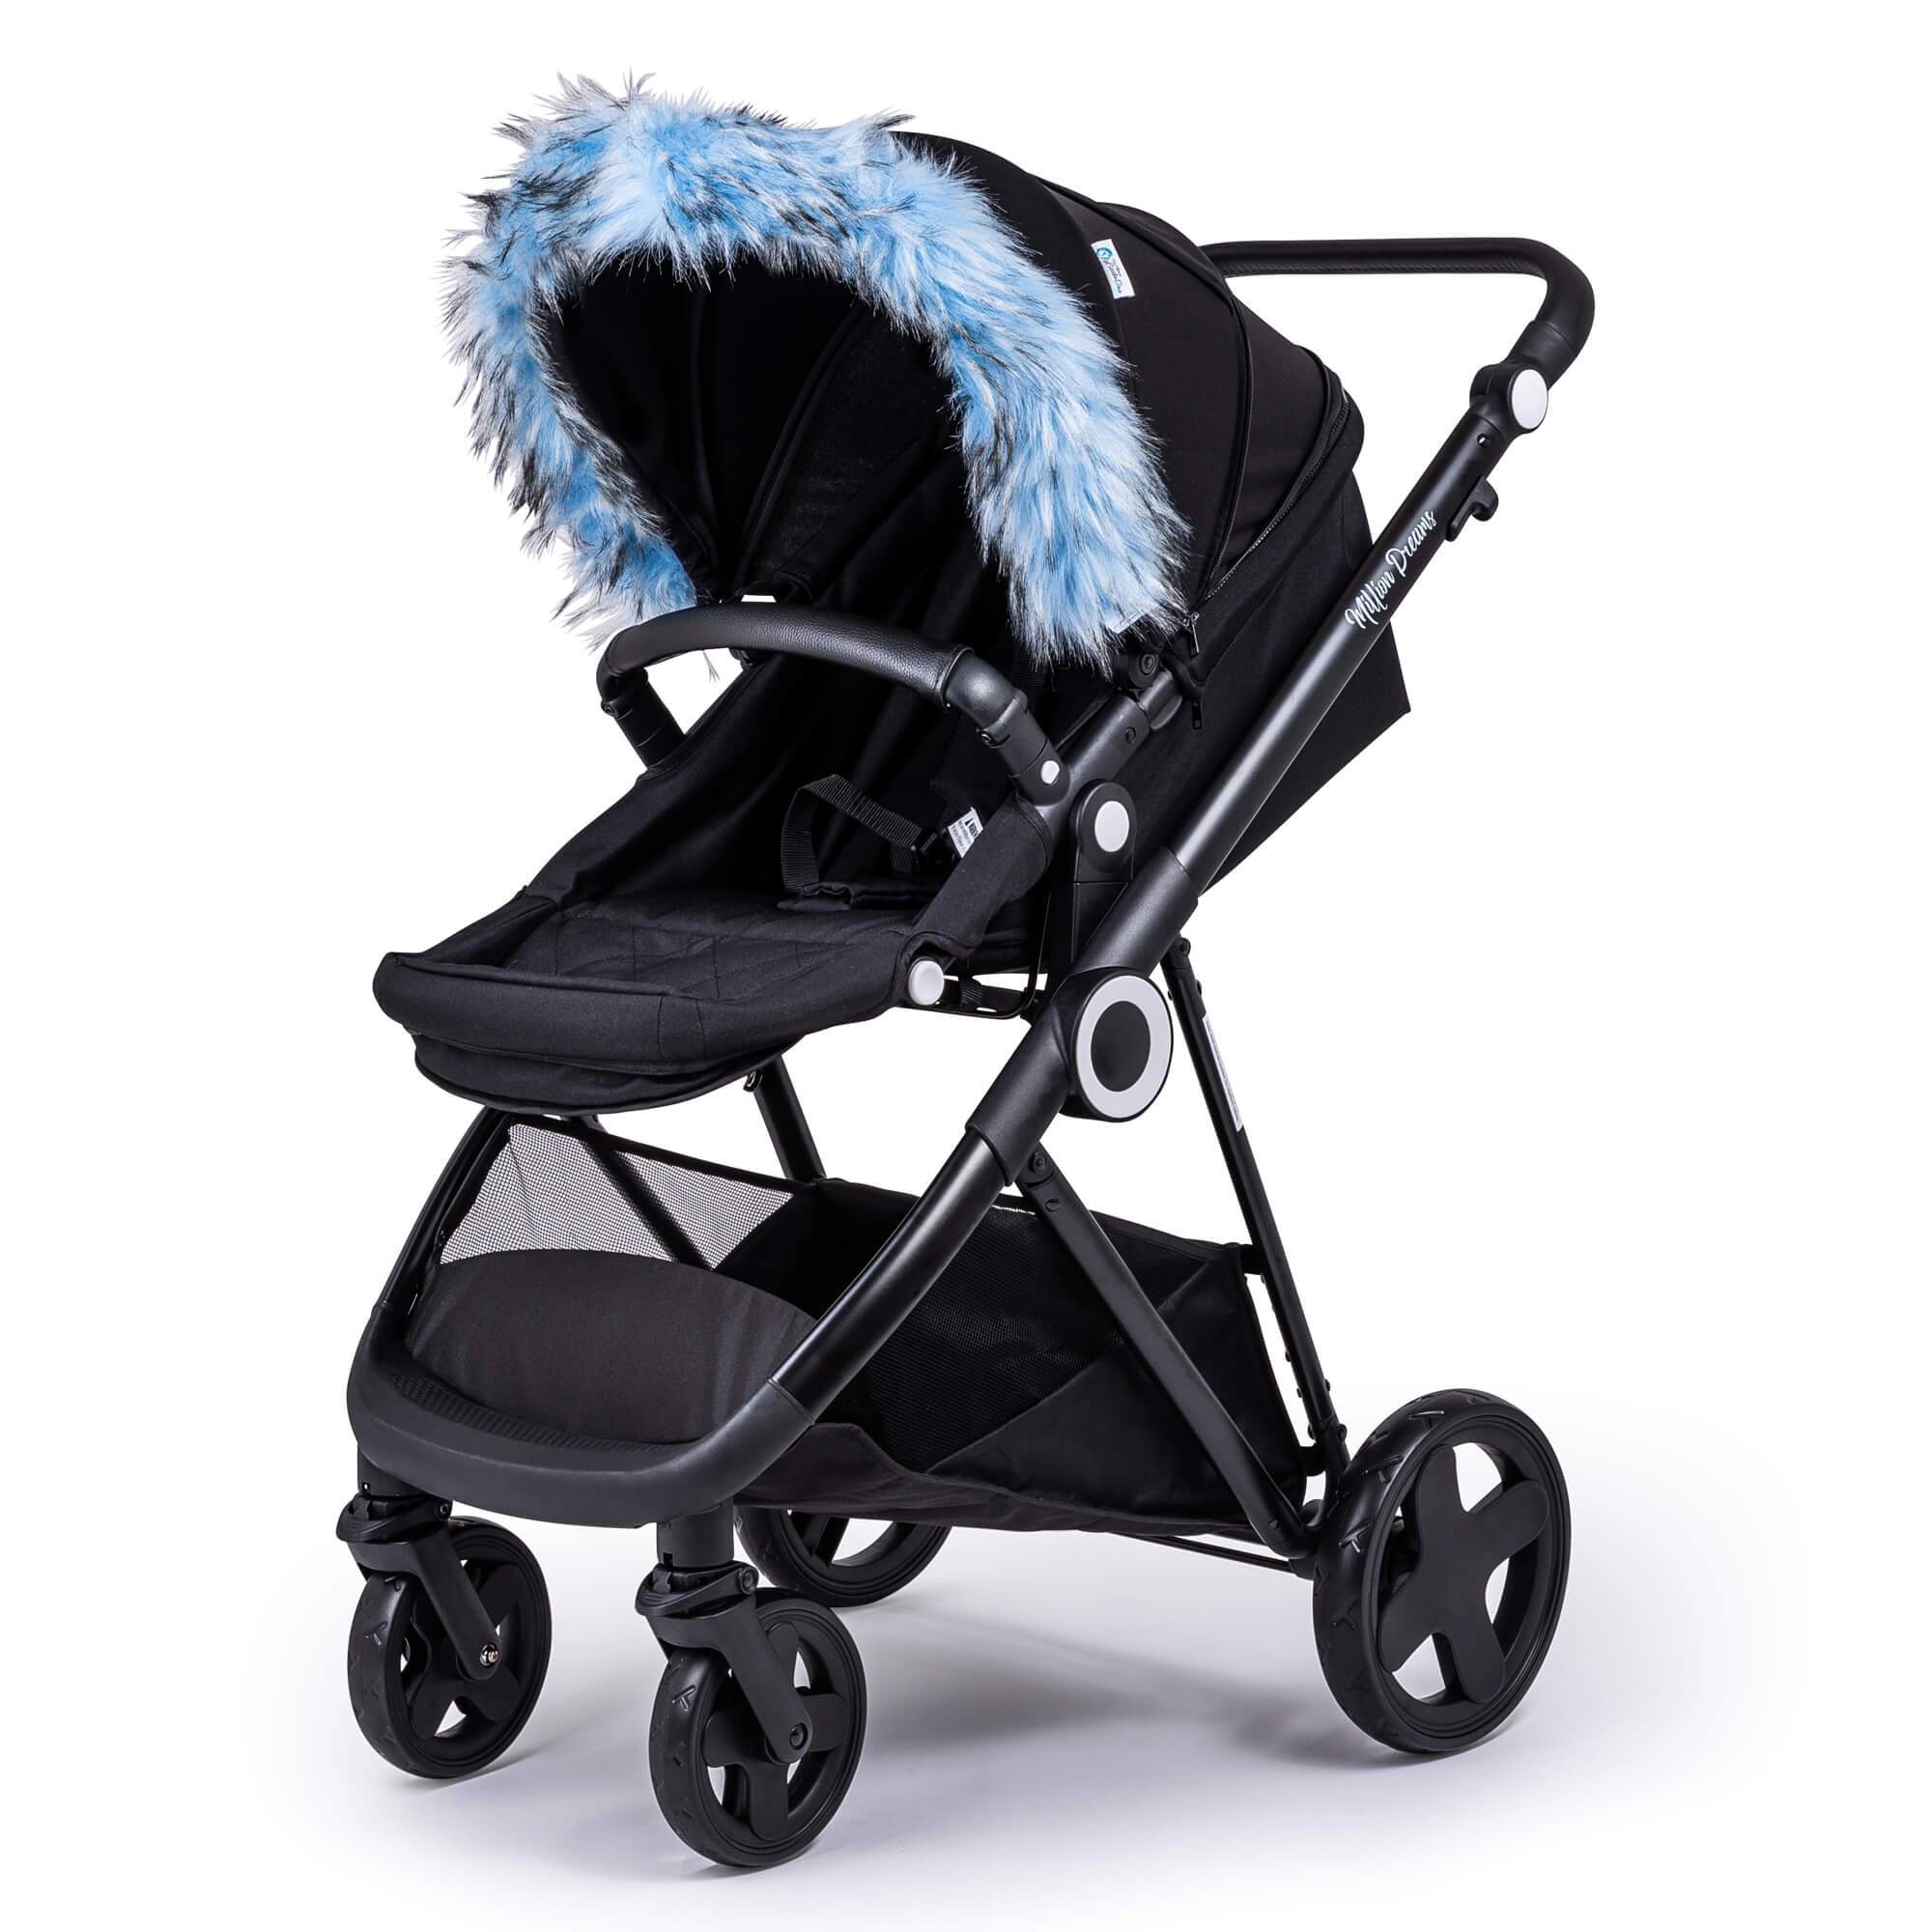 Pram Fur Hood Trim Attachment for Pushchair Compatible with Baby Weavers - Light Blue / Fits All Models | For Your Little One